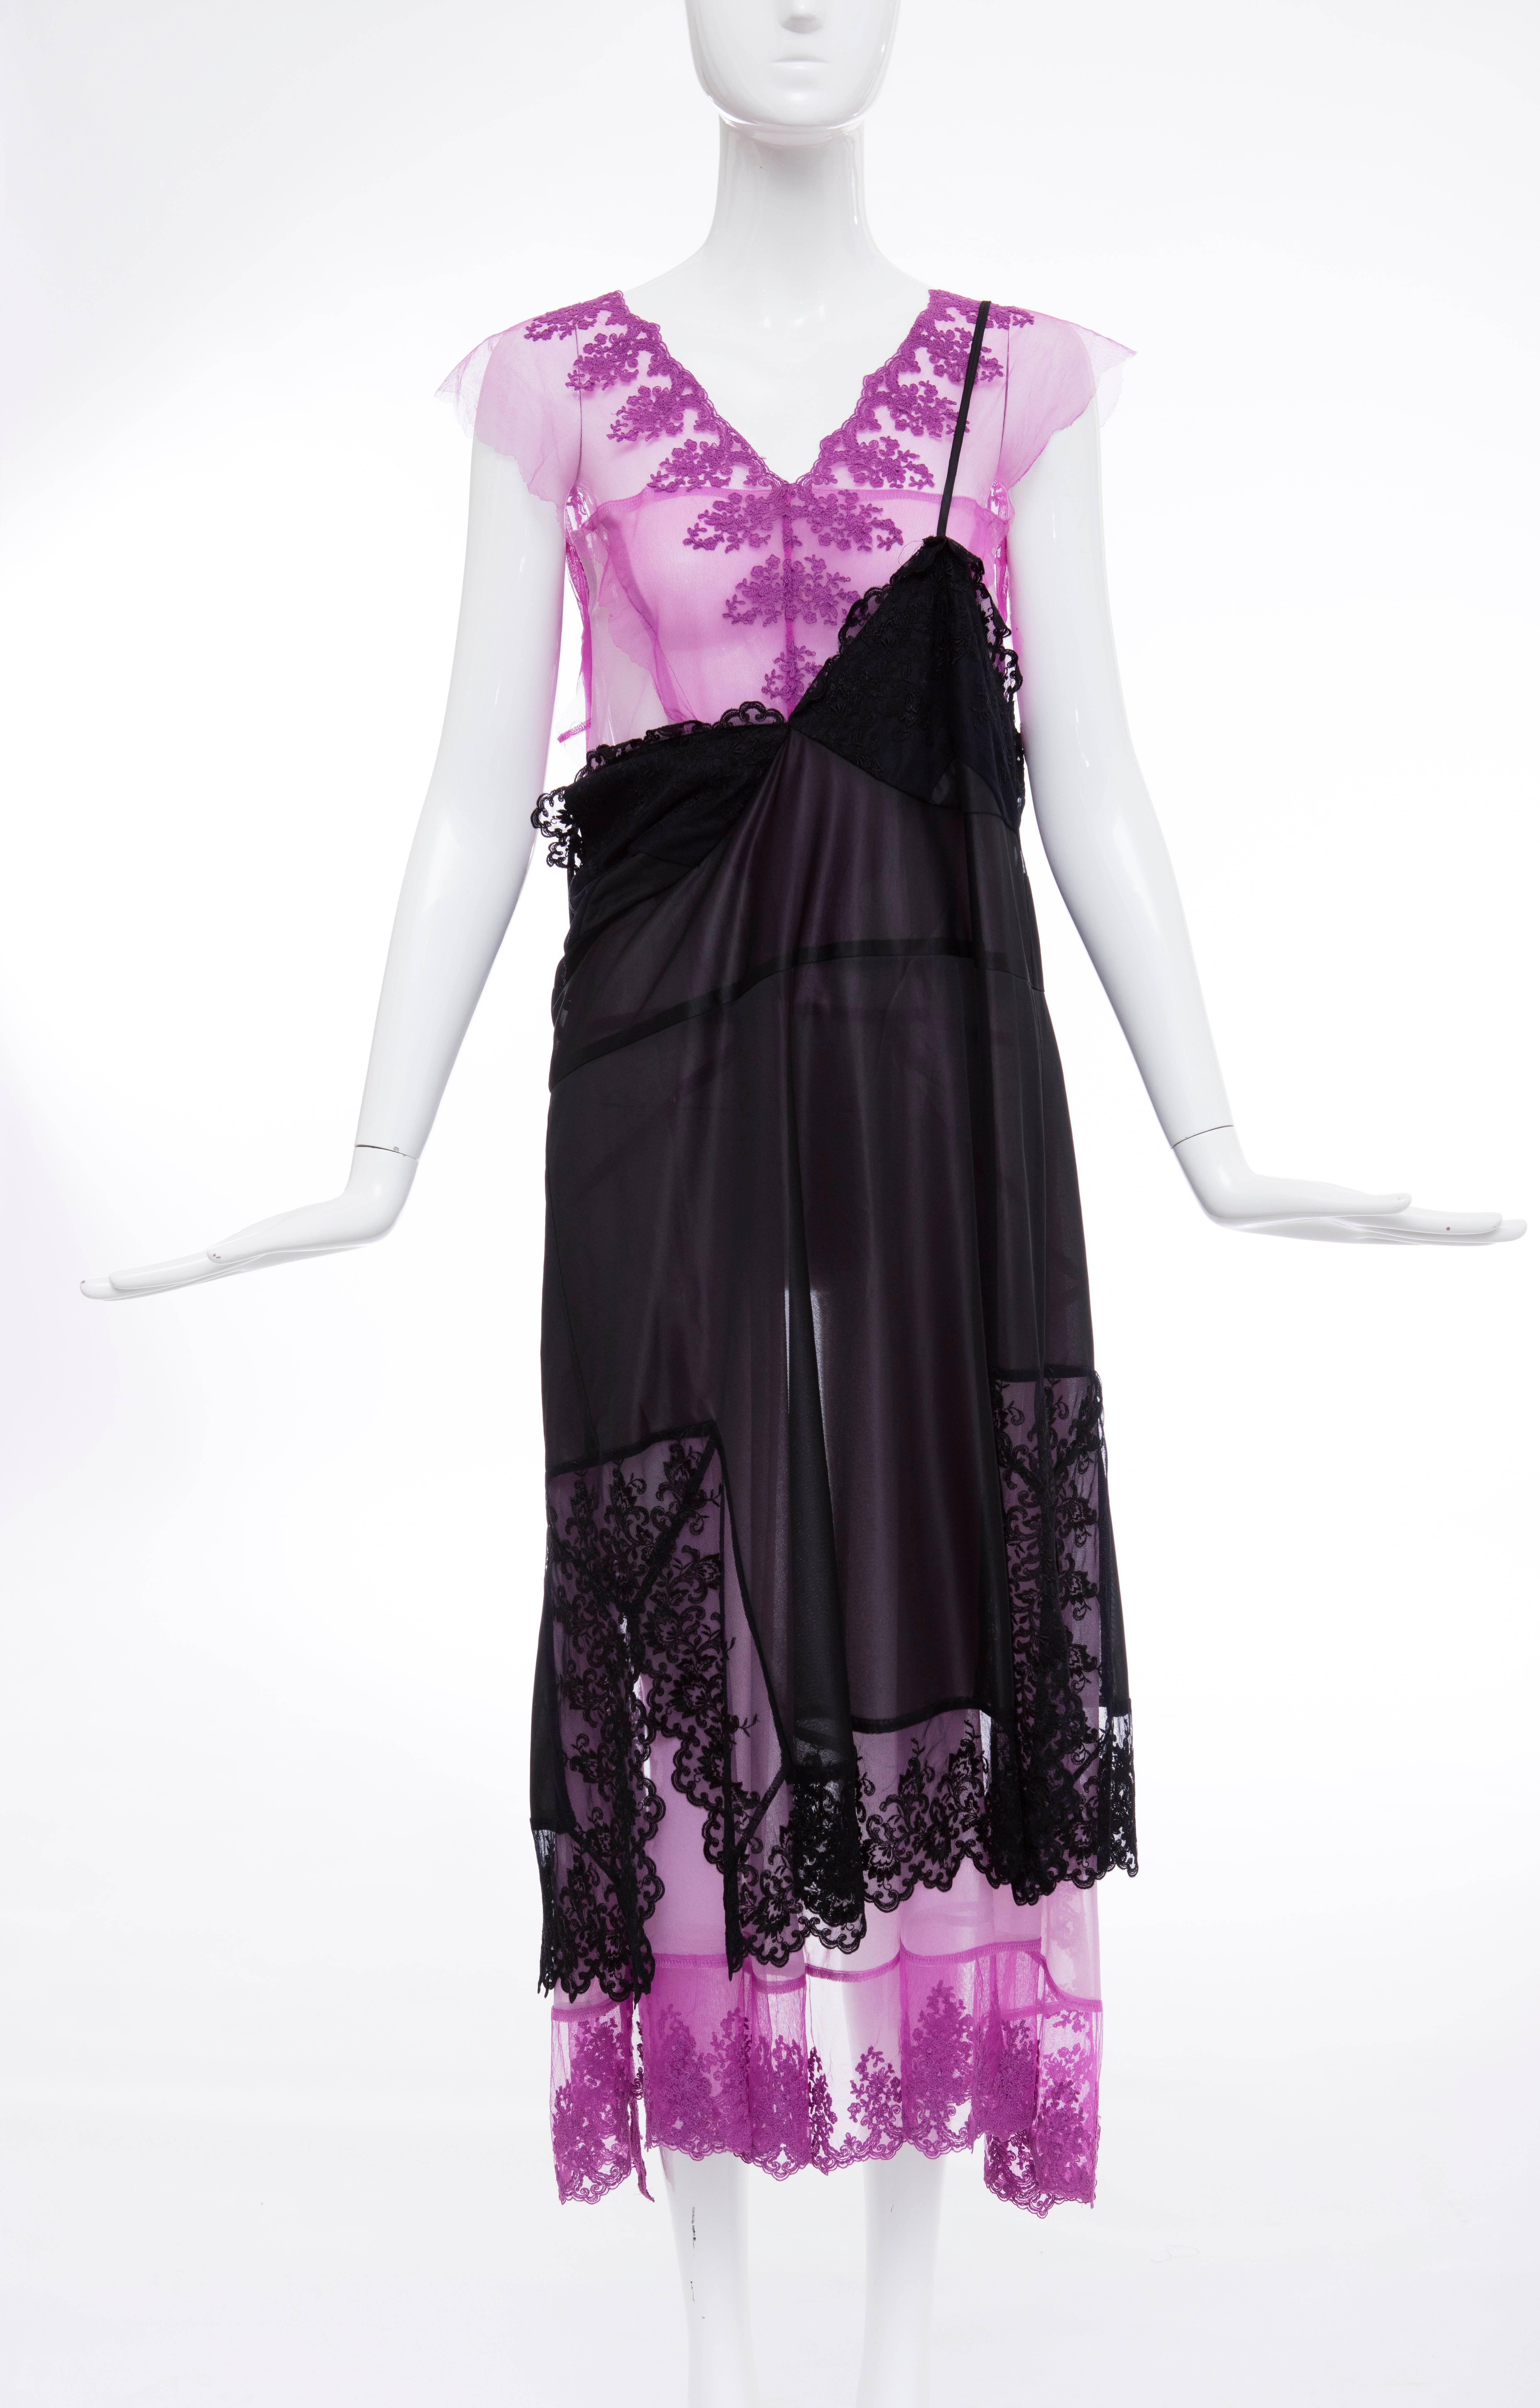 A Comme des Garcons 'lingerie' dress, 'Beyond Taboo', Autumn-Winter, 2001 collection, ribbon label and size S, the embroidered purple nylon 'negligee' worn under a black nylon slip panel with large elastic bra strap to fasten.

This design appeared